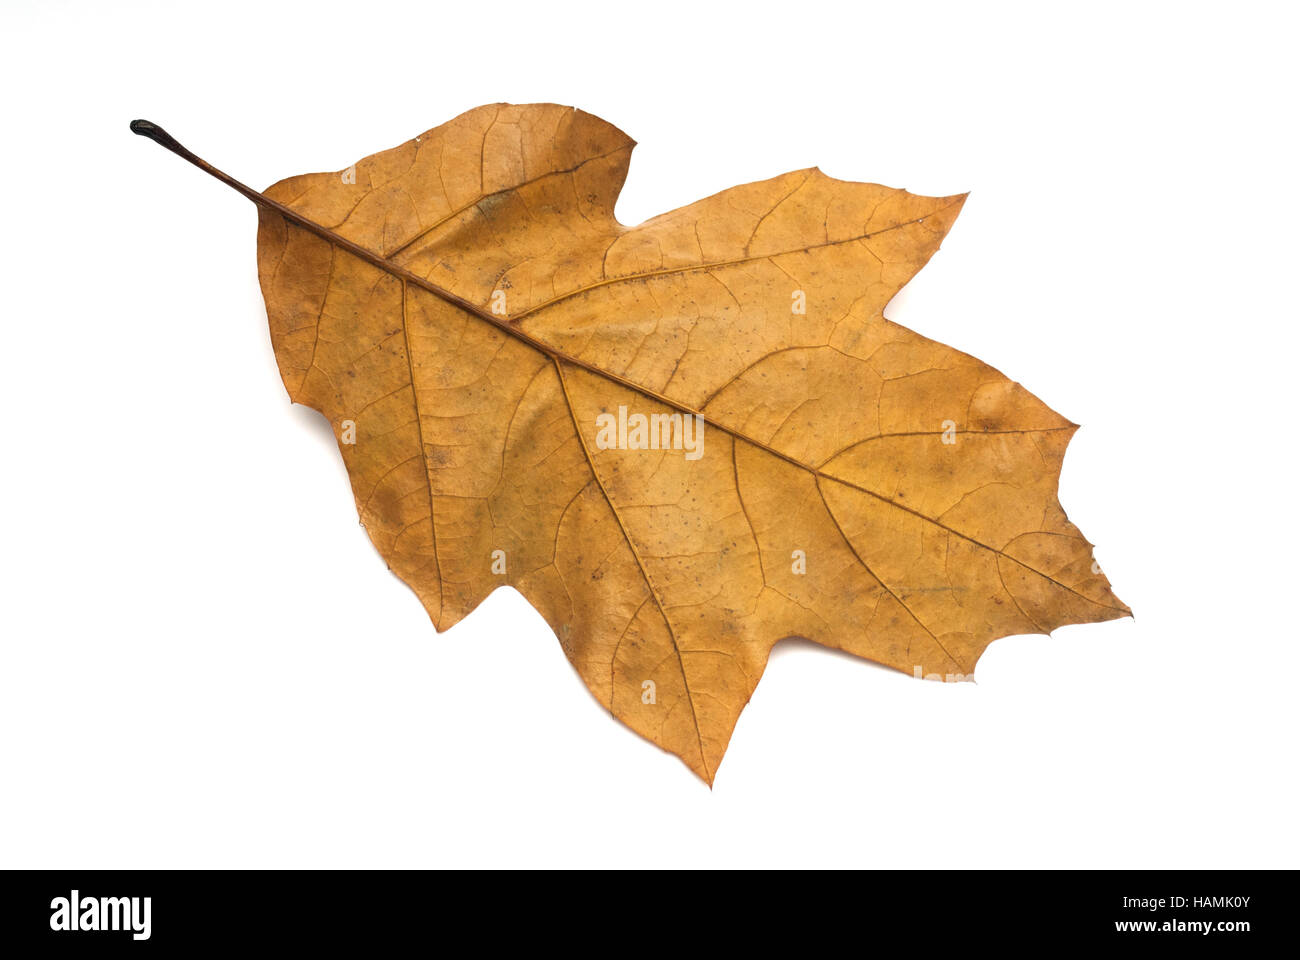 Dry leaf showing veins Stock Photo